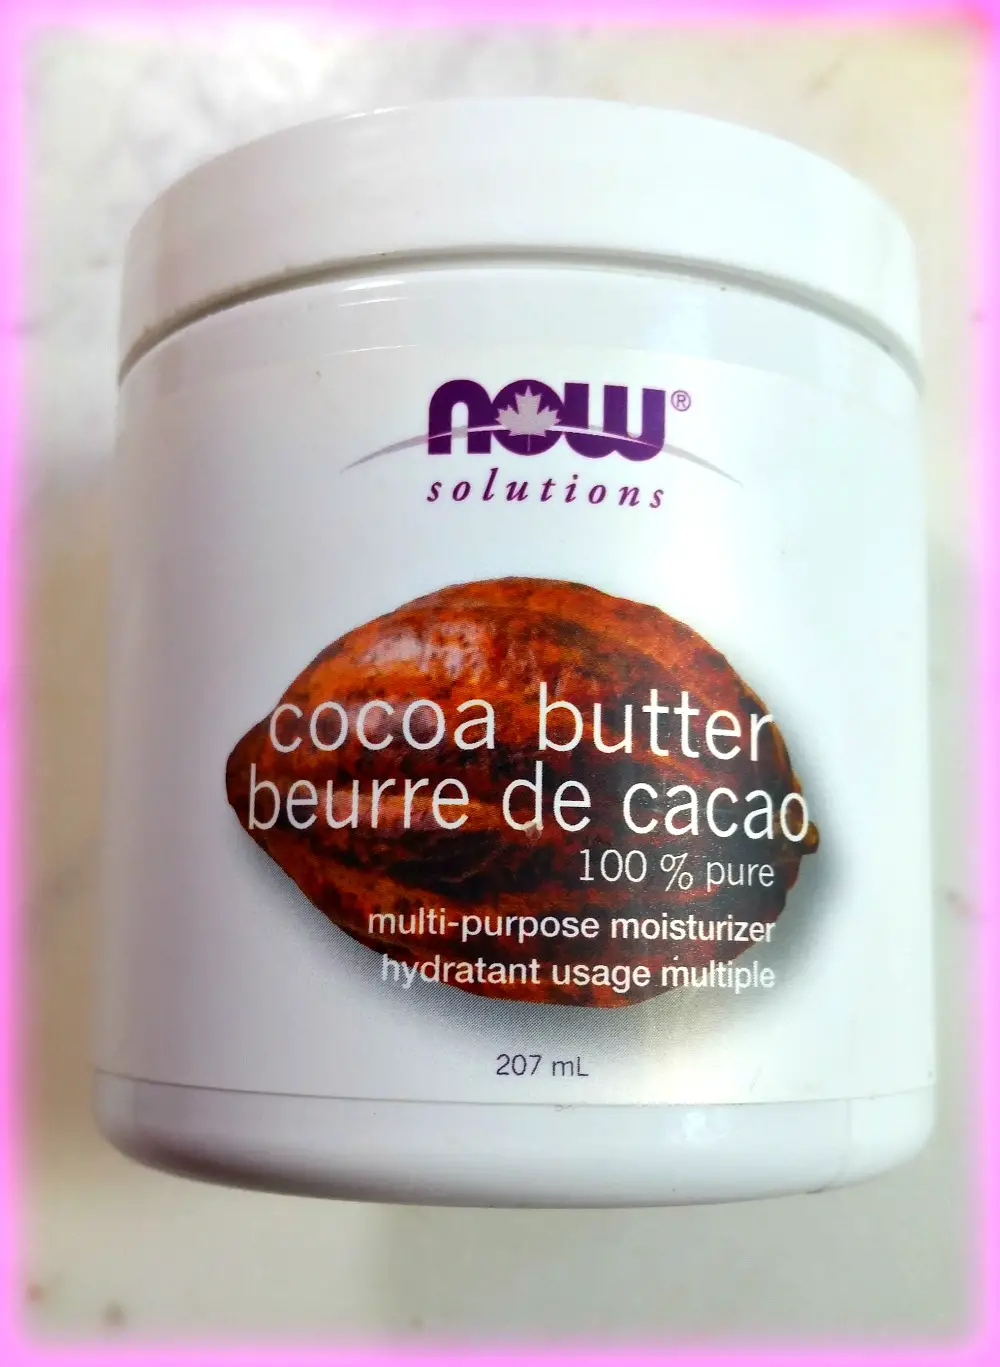 The Beauty Uses of Cocoa Butter